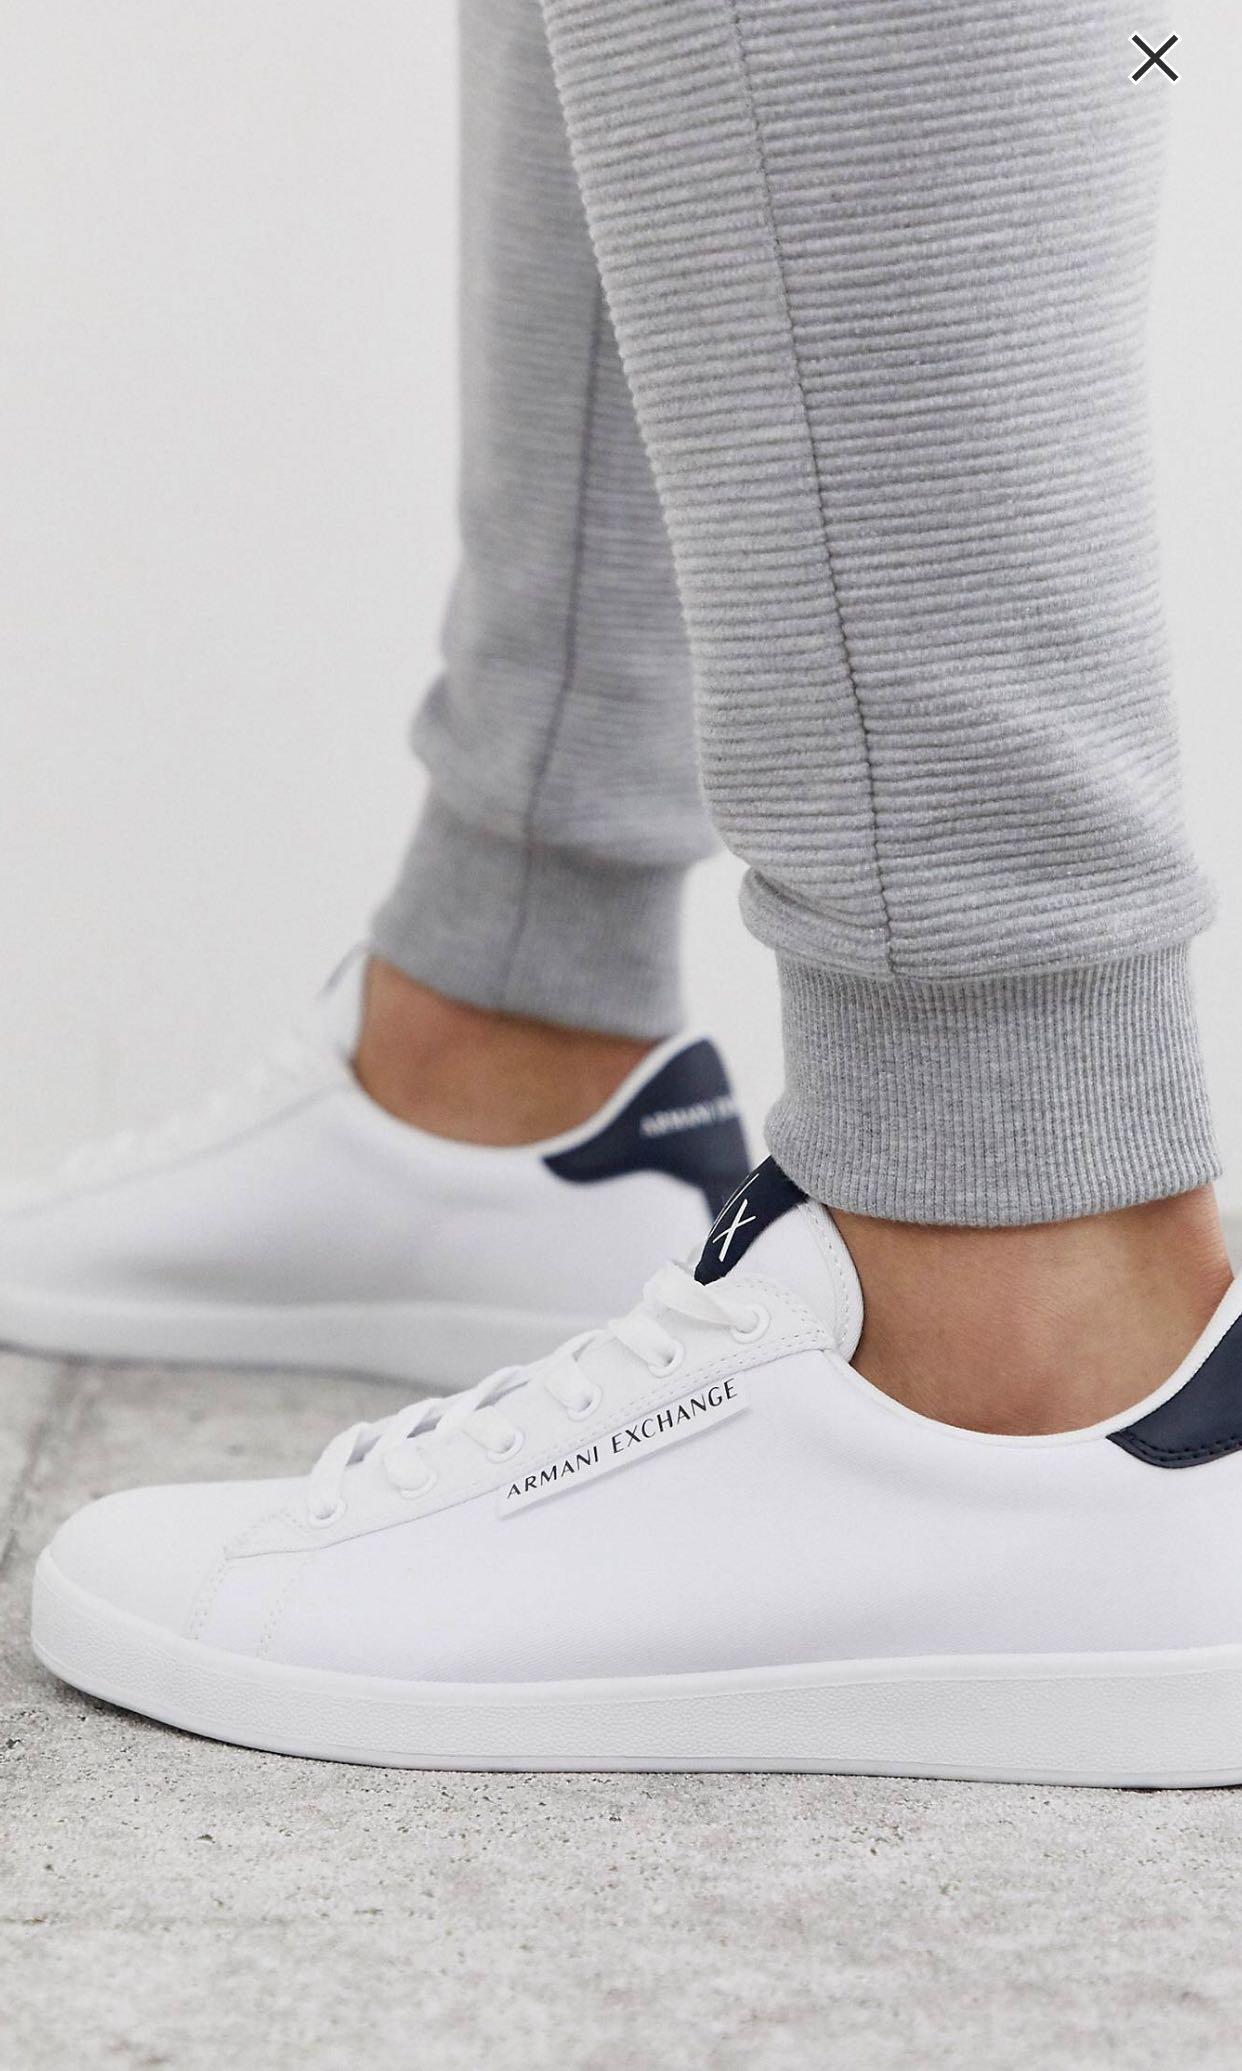 Armani Exchange Trainers in white with 